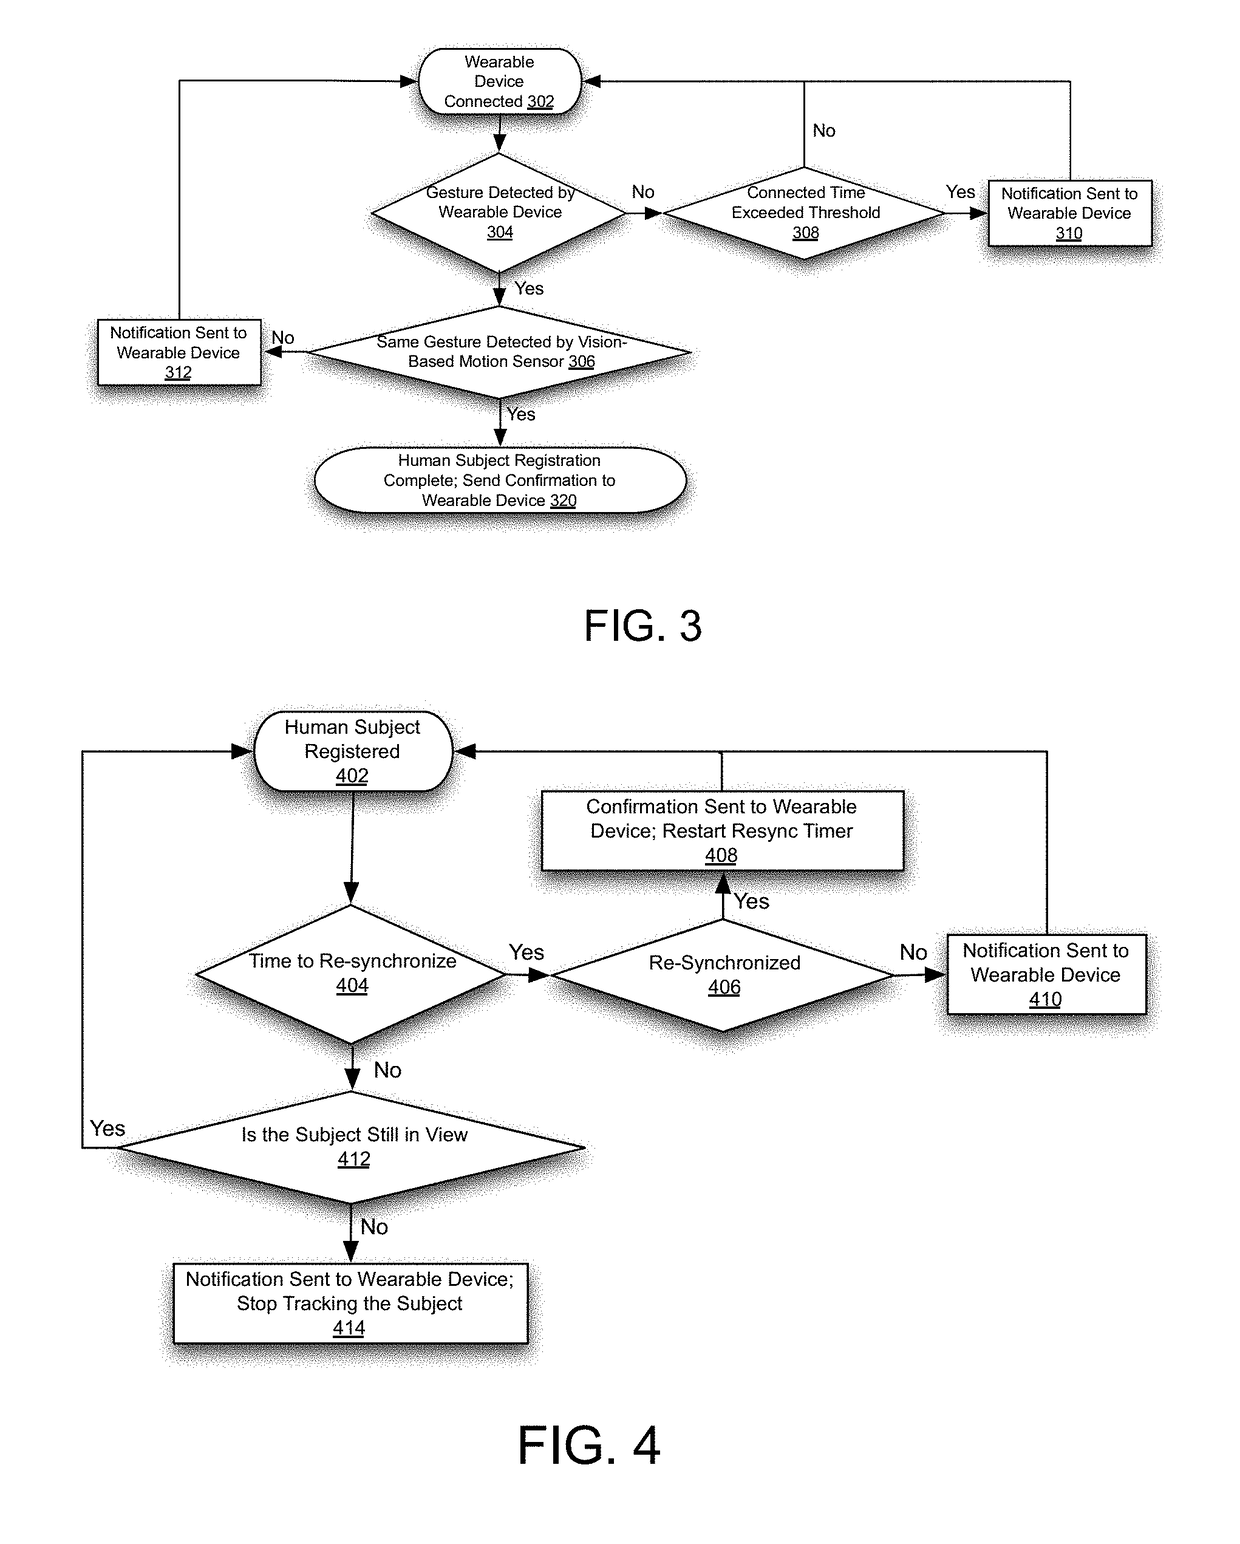 Systems and methods for privacy-aware motion tracking with notification feedback